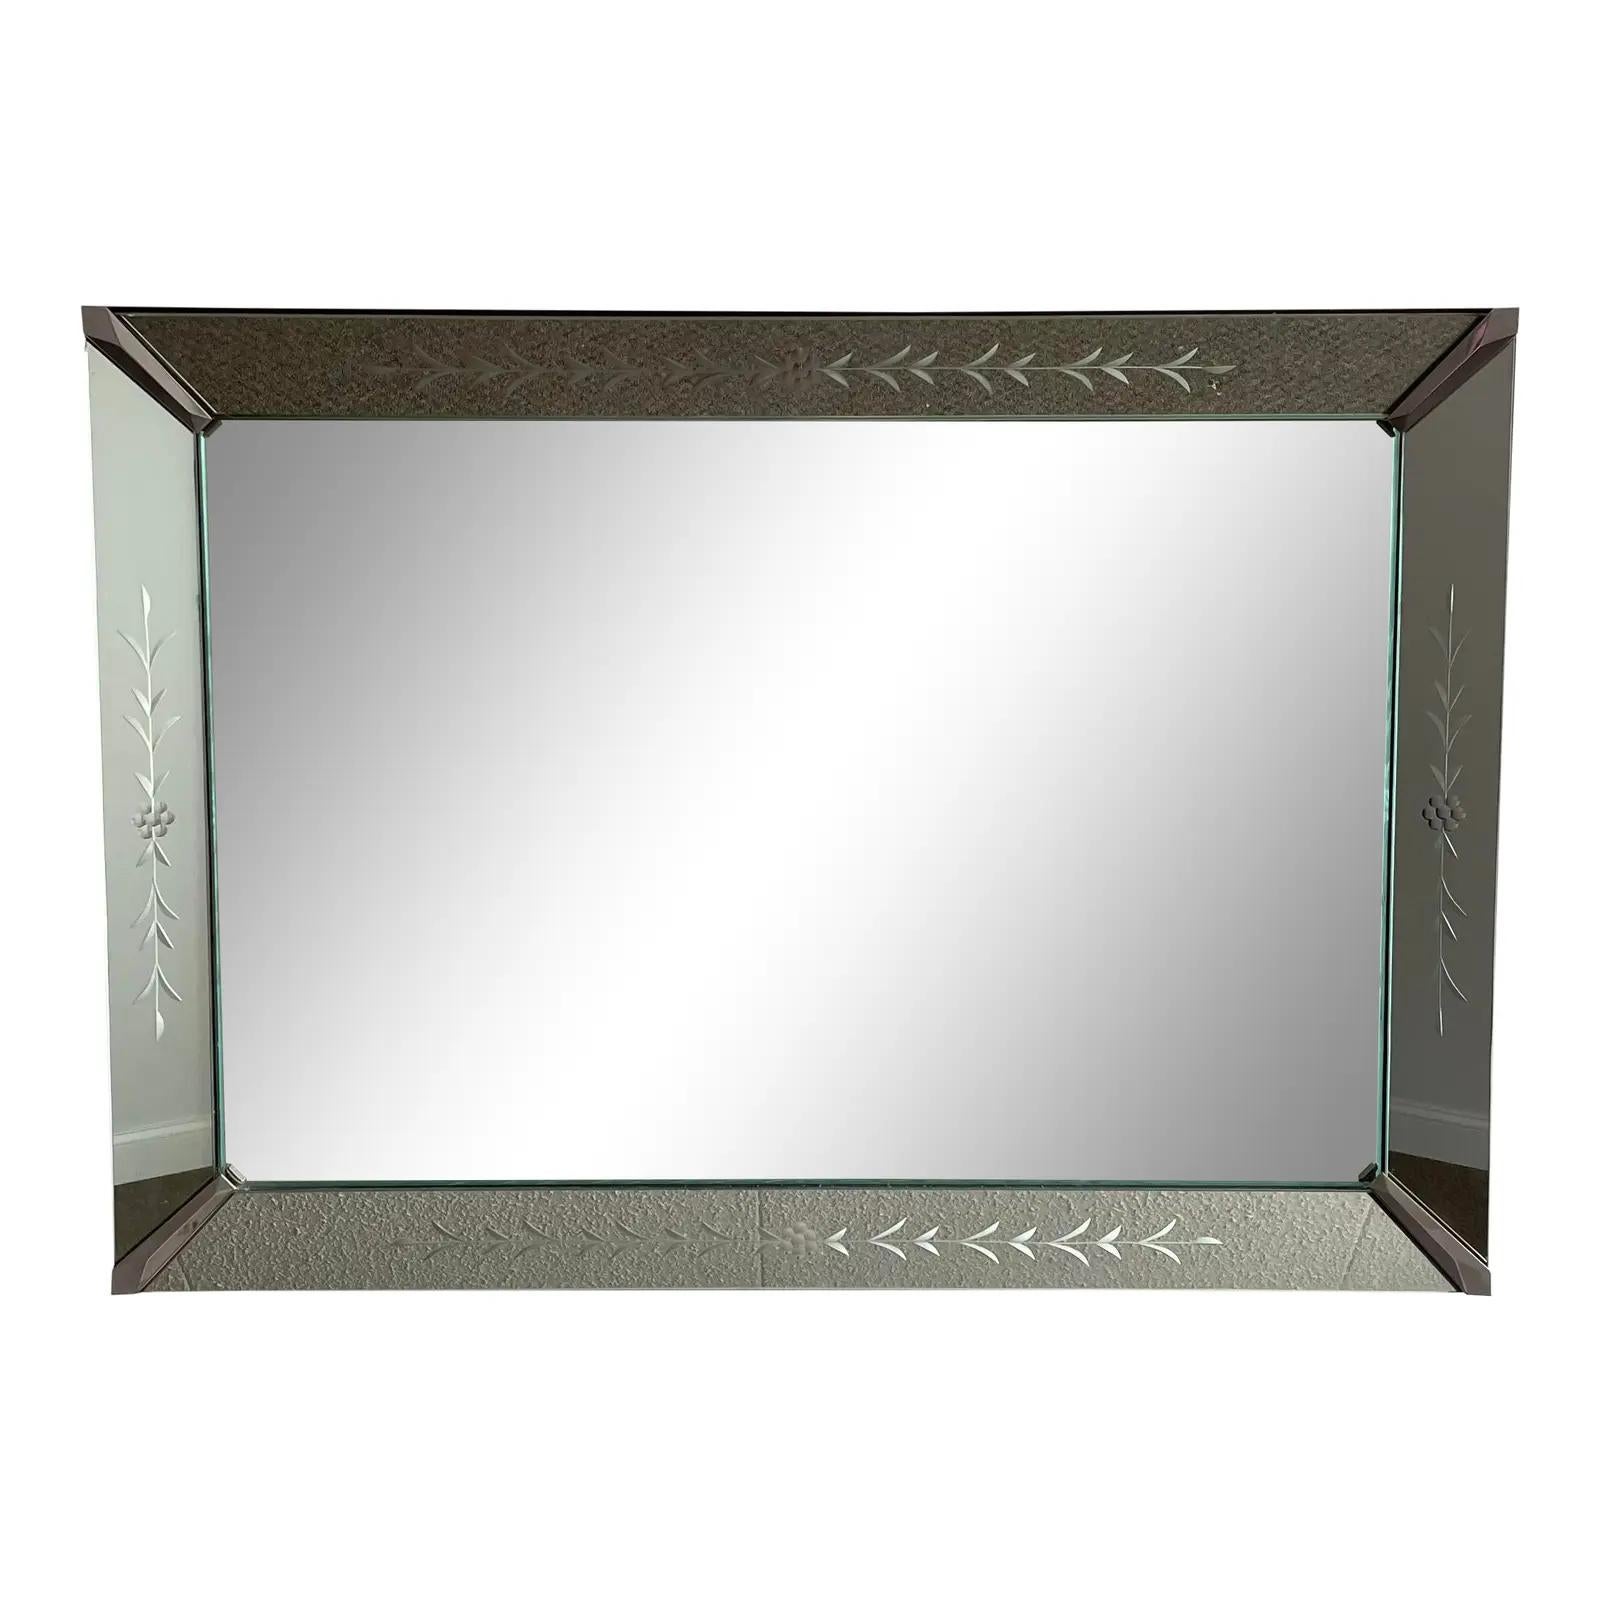 Vintage Art Deco Venetian Etched Wall Mirror In Good Condition For Sale In W Allenhurst, NJ